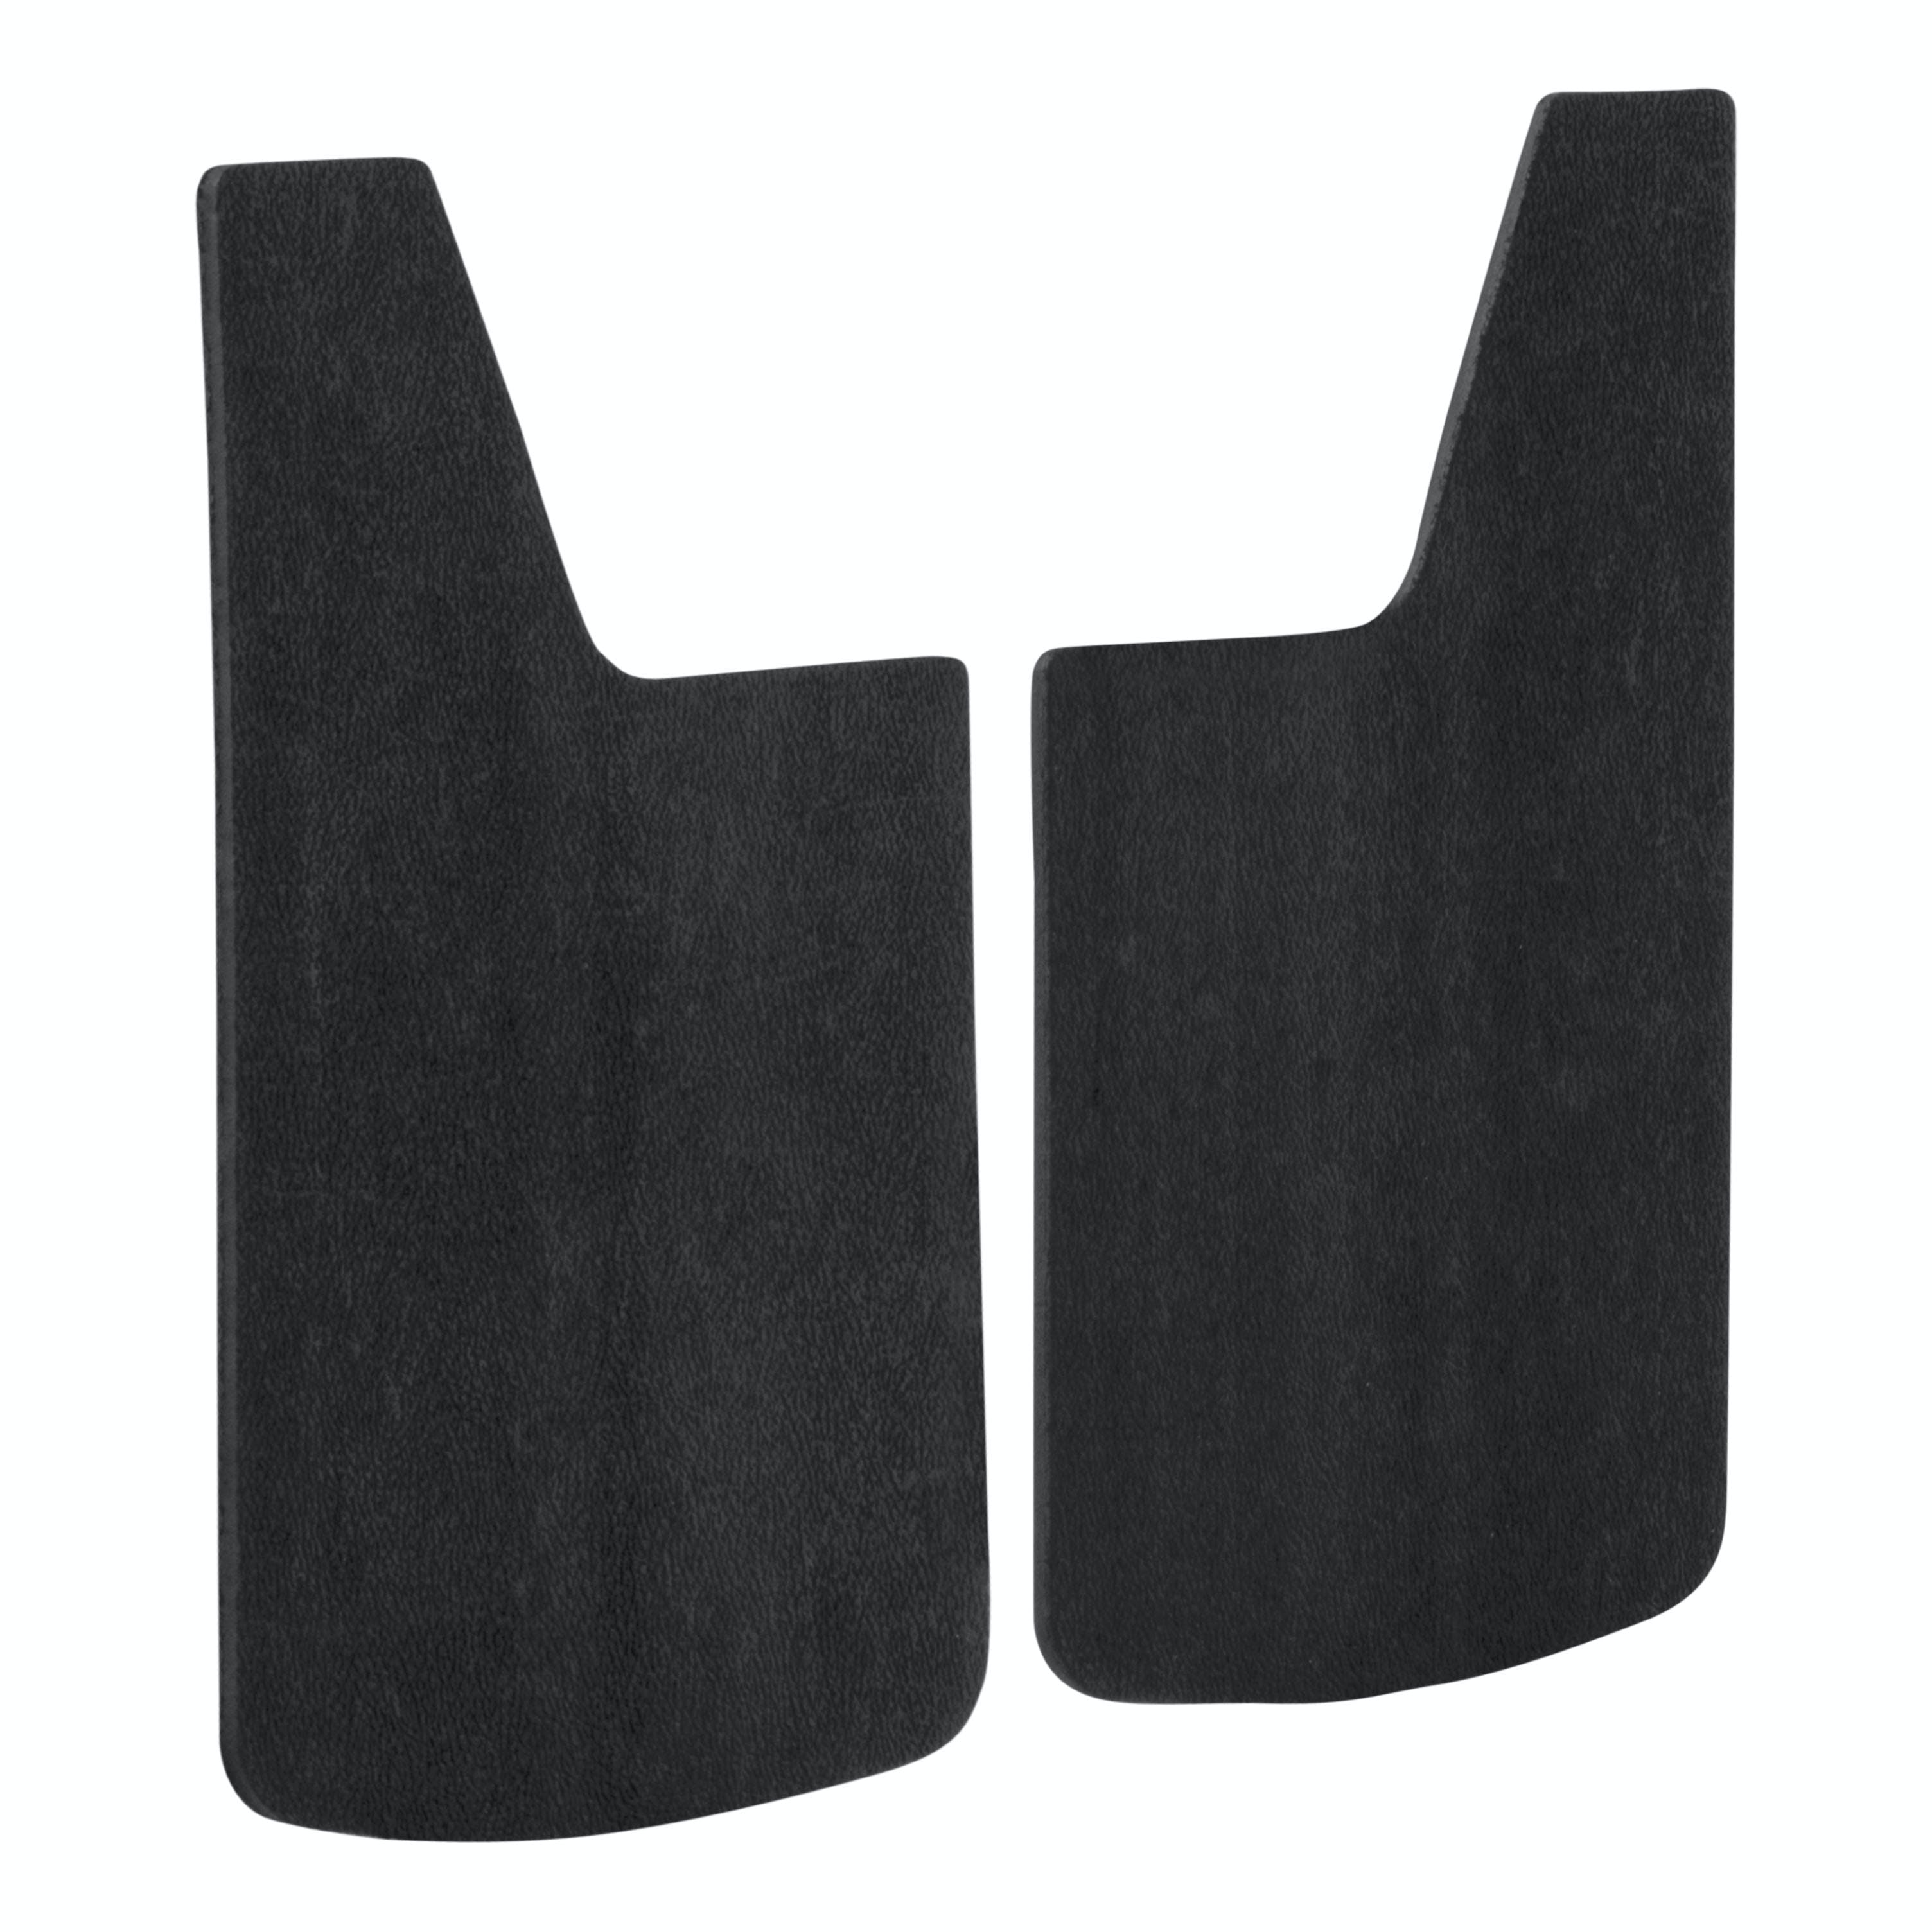 LUVERNE 251014 Universal Textured Rubber Mud Guards